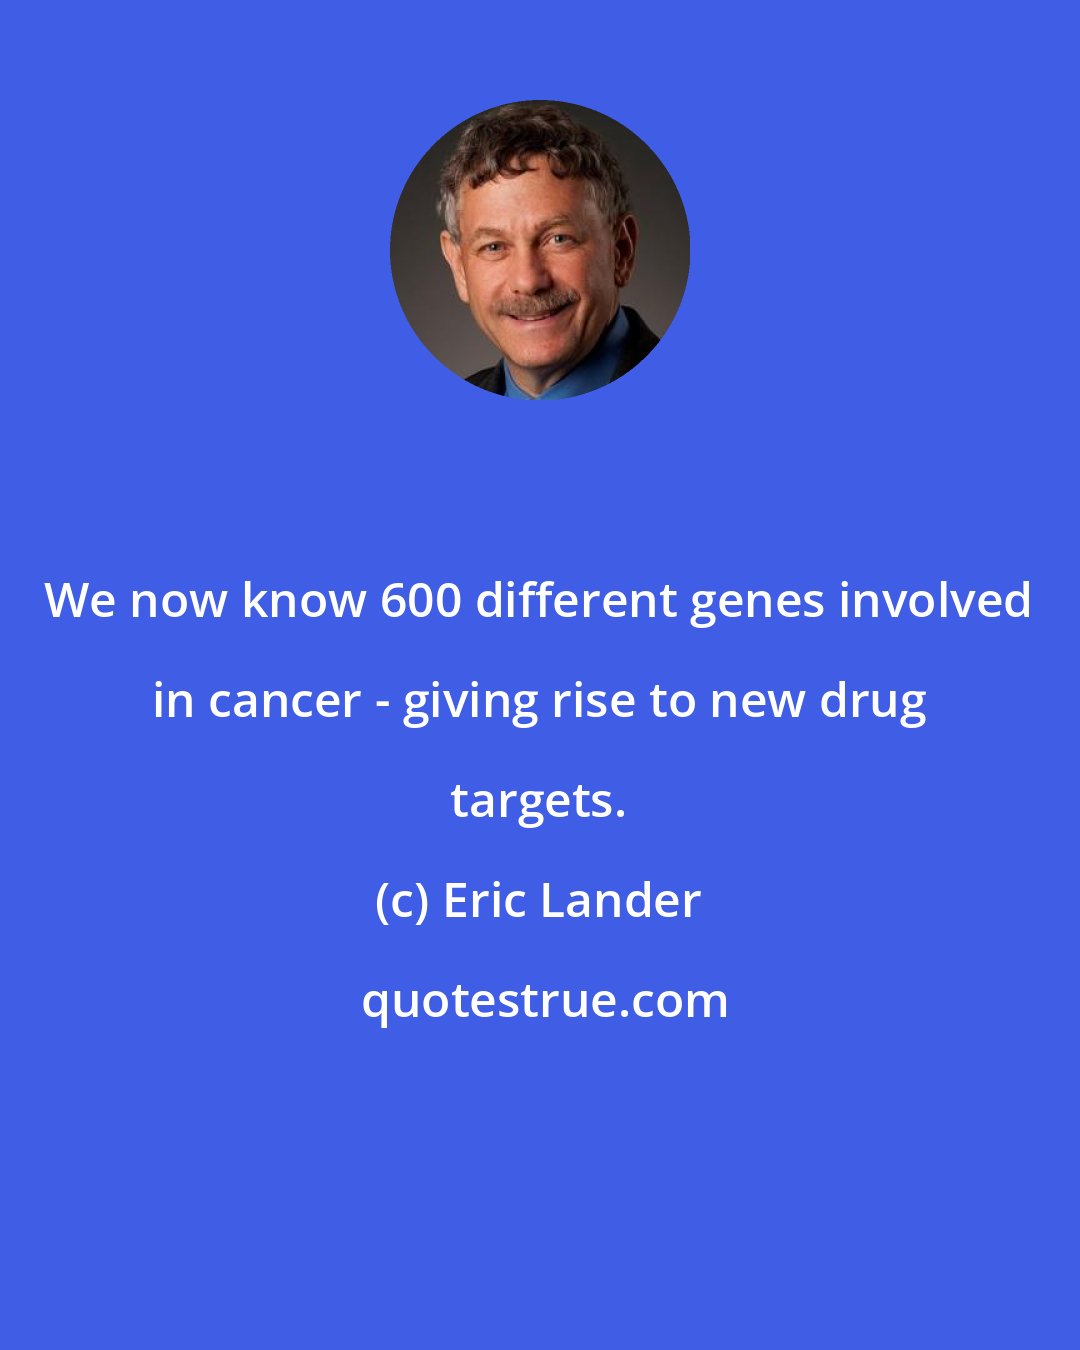 Eric Lander: We now know 600 different genes involved in cancer - giving rise to new drug targets.